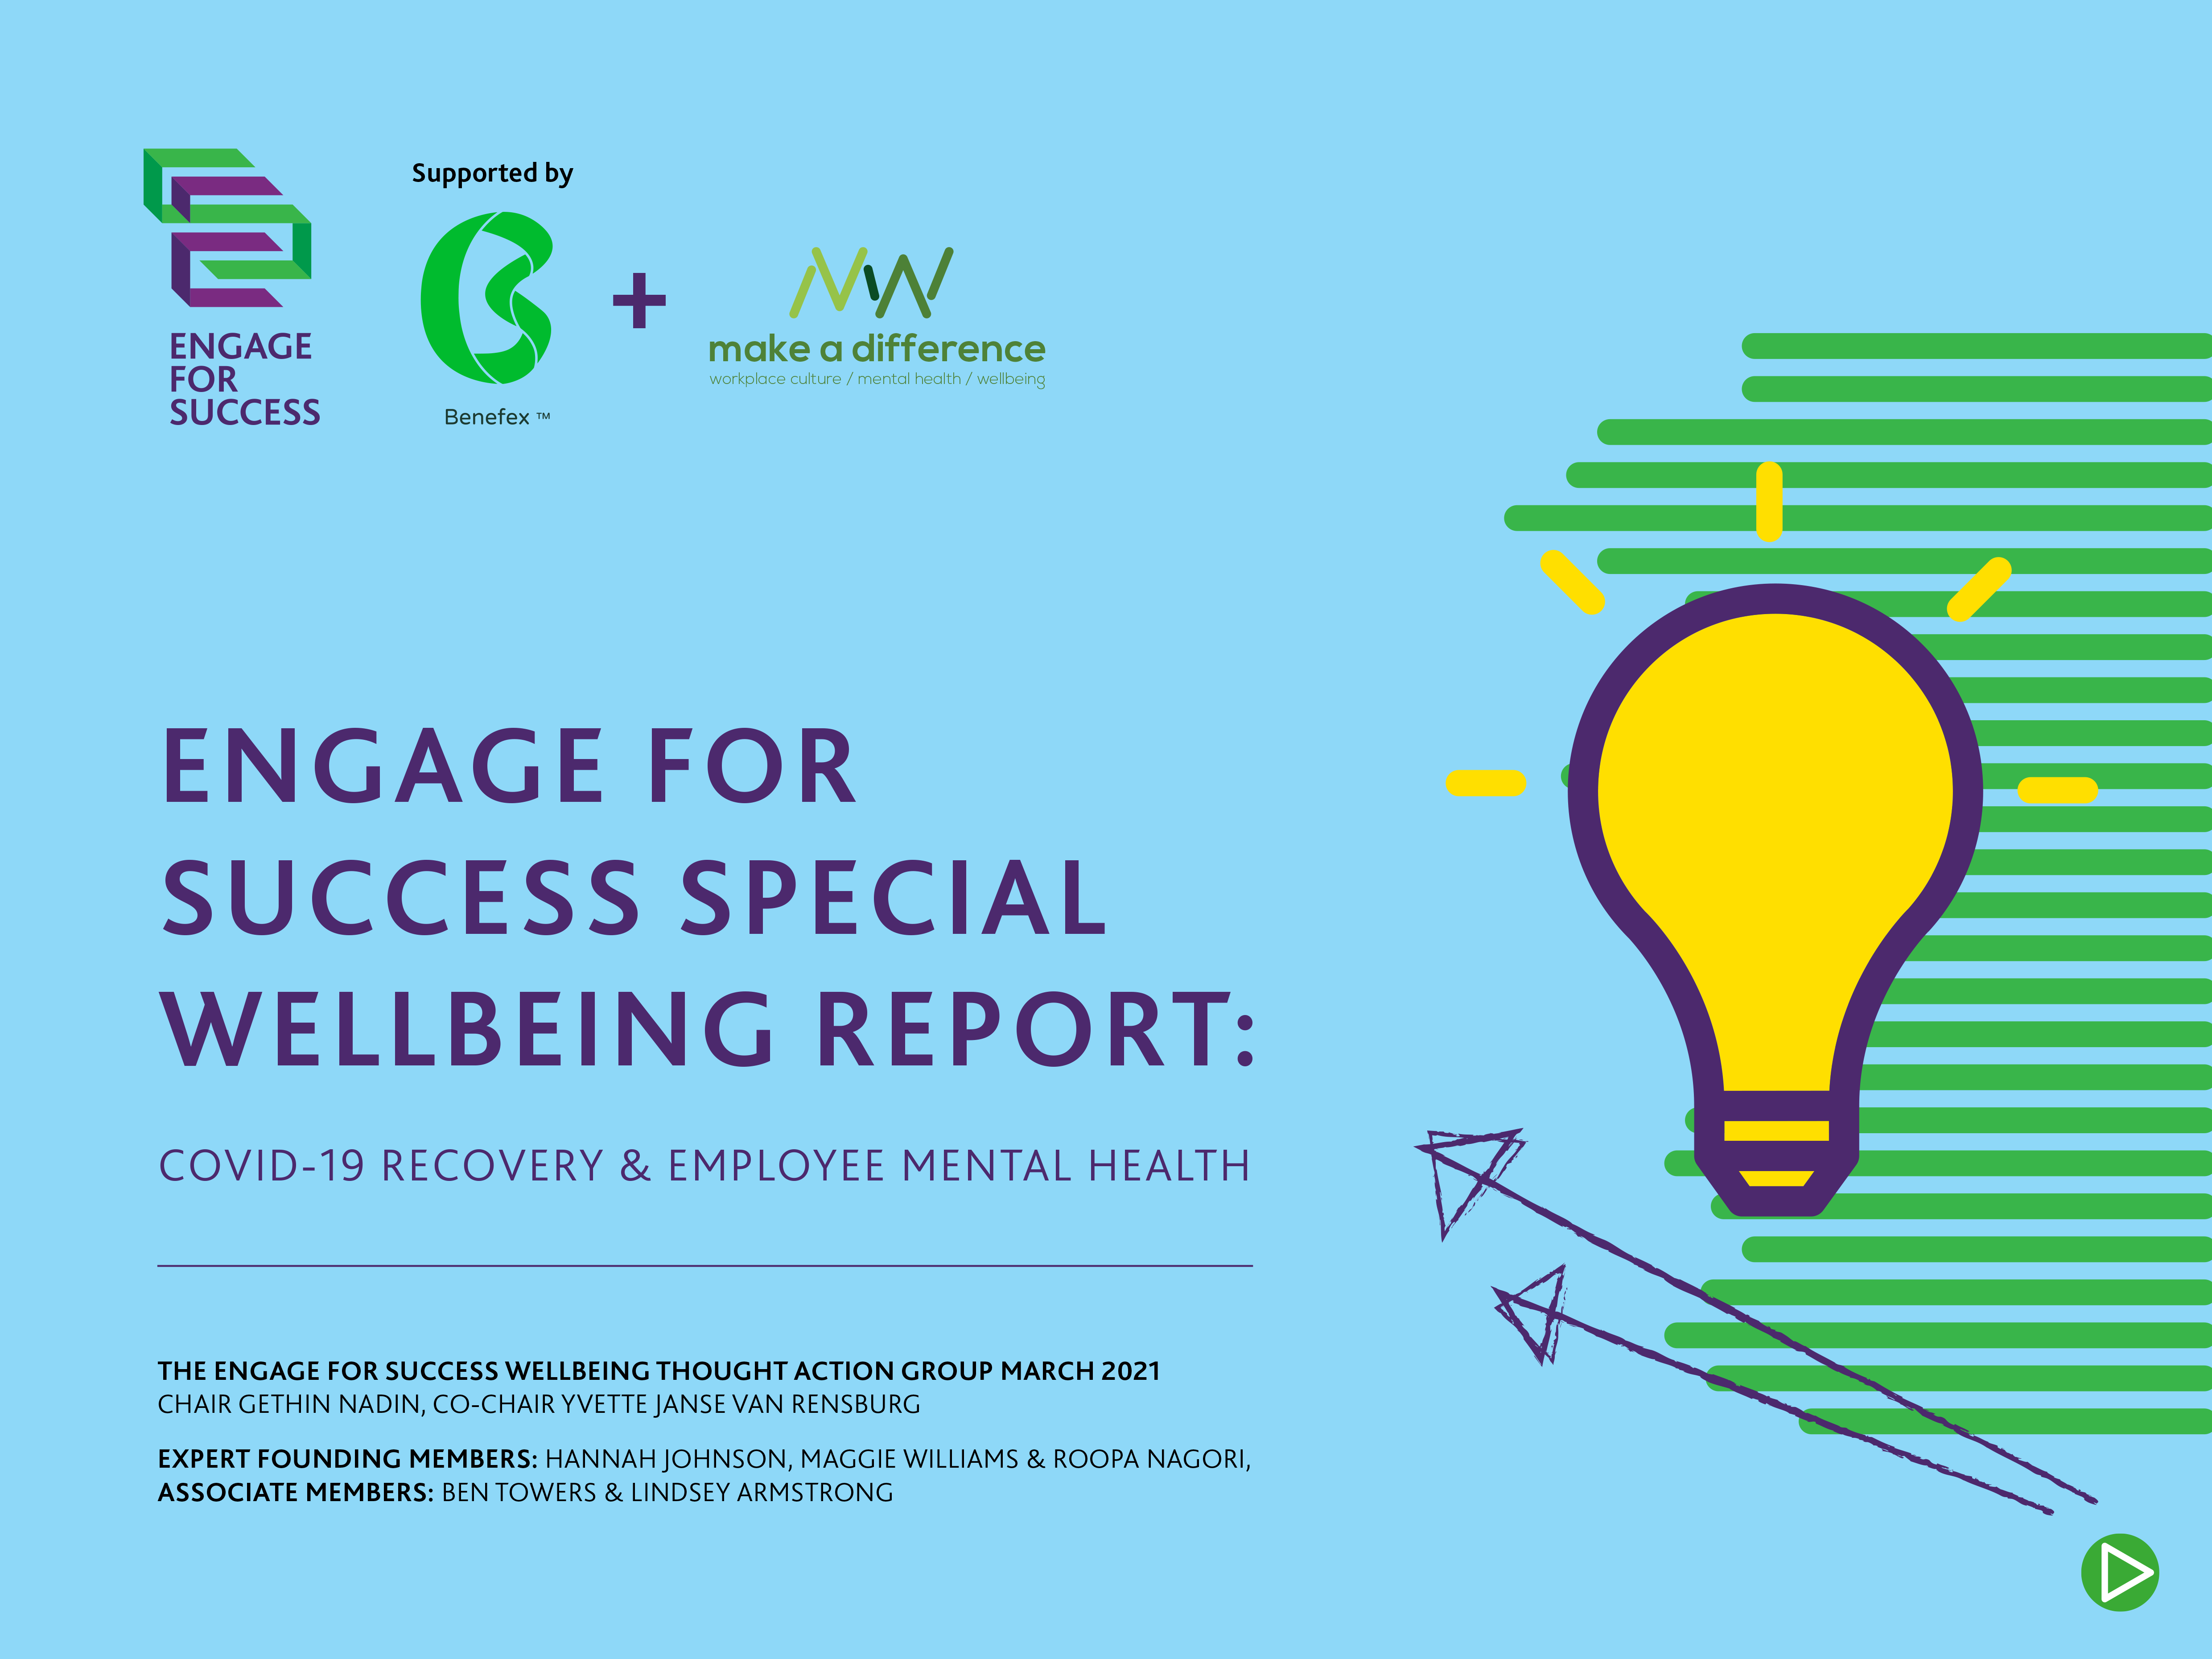 Engage for success special wellbeing report: COVID-19 Recovery & Employee Mental Health